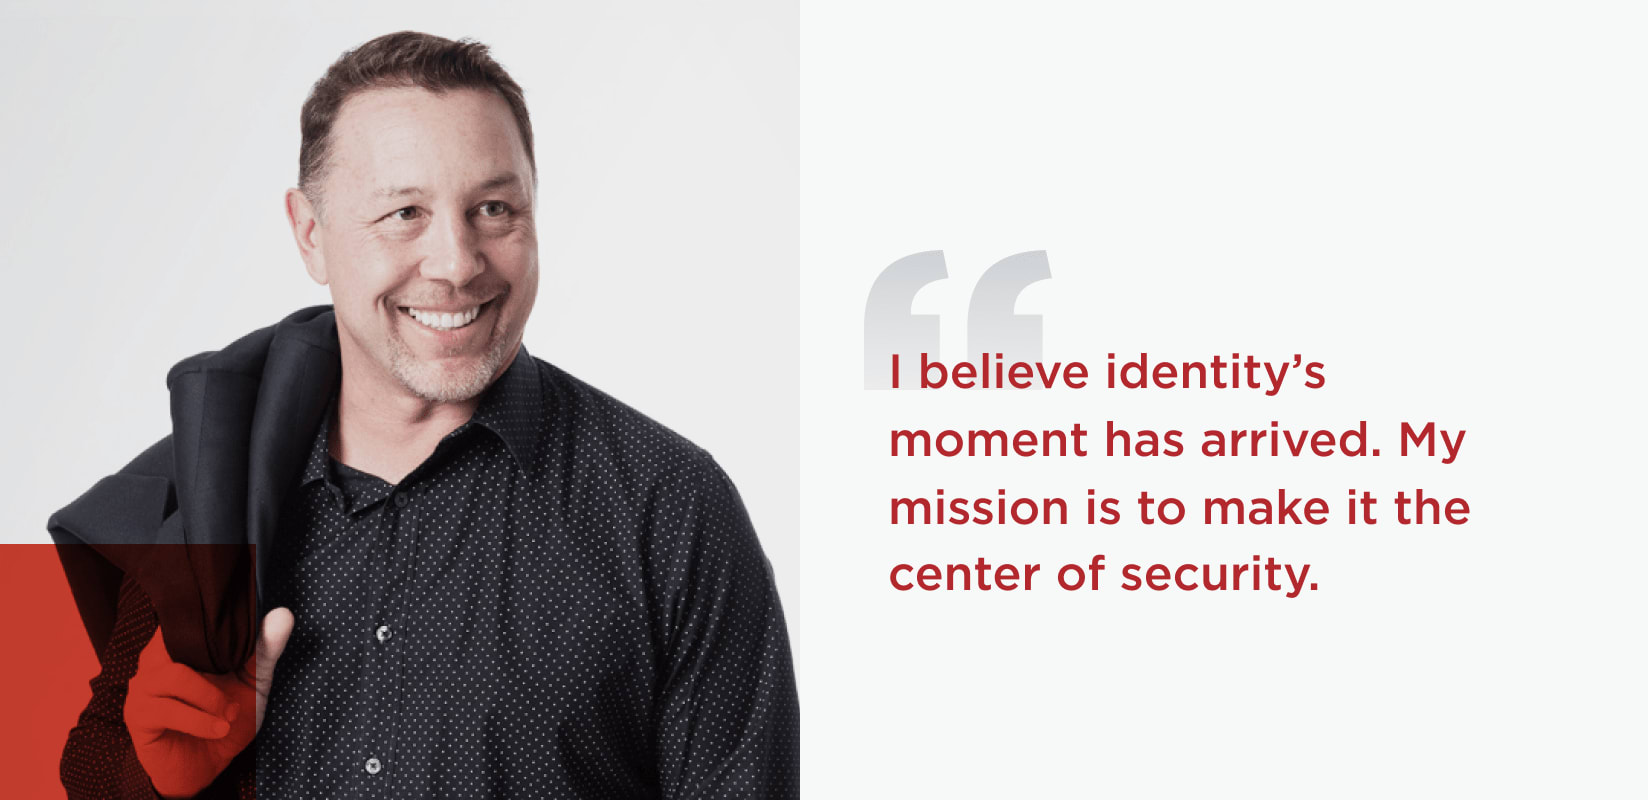 Decorative headshot of Ping Identity Founder & Chief Executive Officer, Andre Durand, with the following quote 'I believe identity's moment has arrived. My mission is to make it the center of security.'